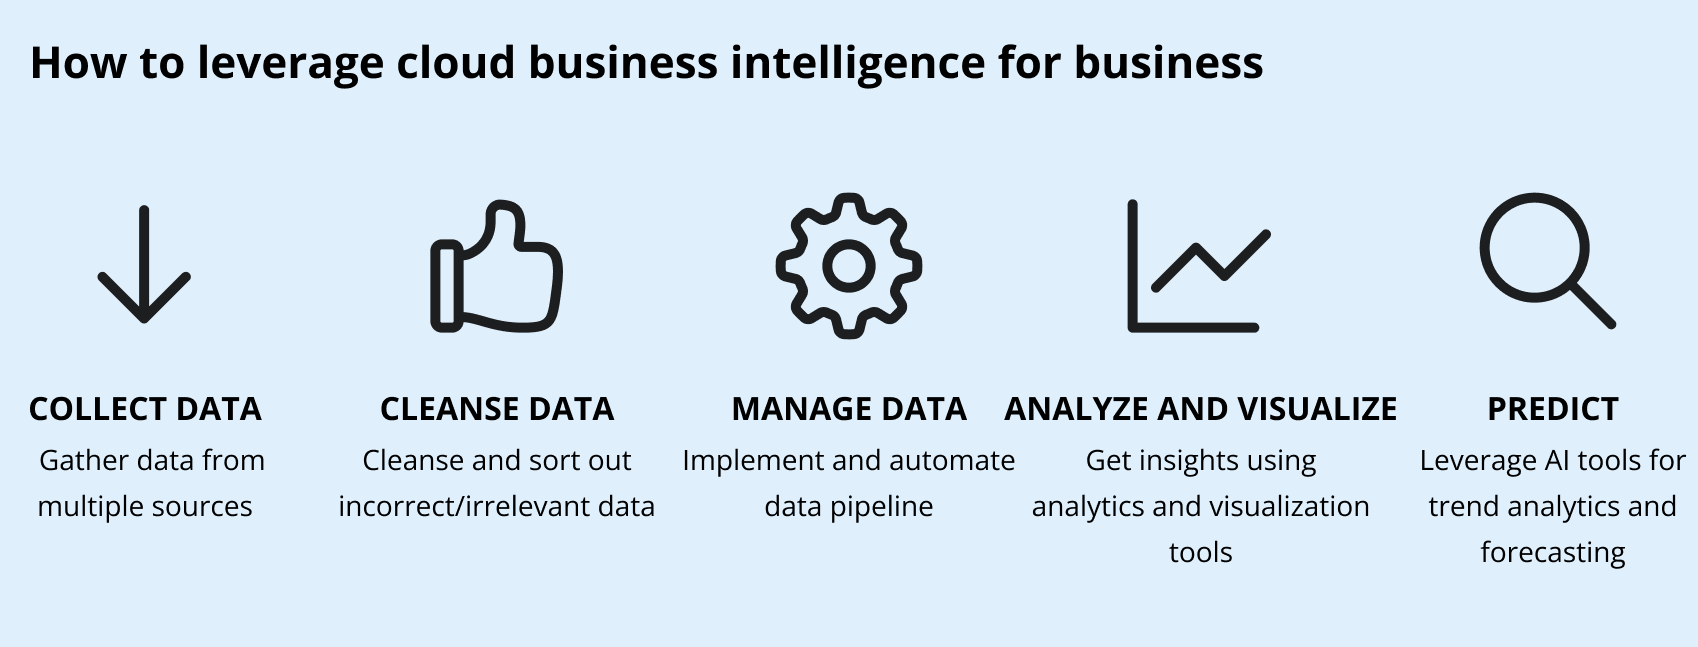 cloud business intelligence for business